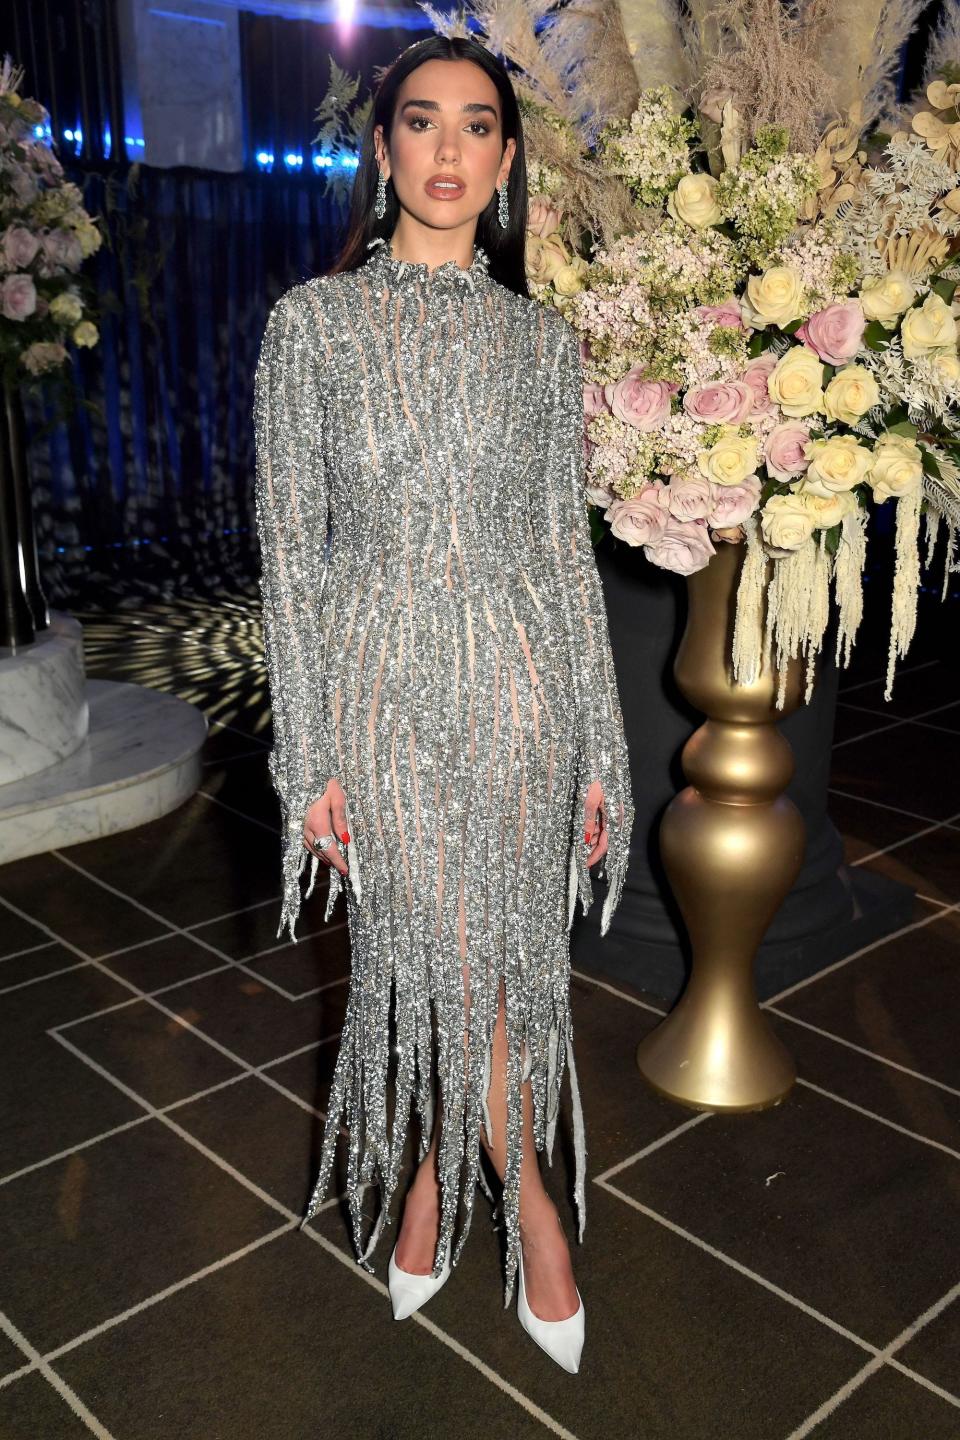 Dua Lipa stands in a silver, sparkly, see-through dress in front of flowers.